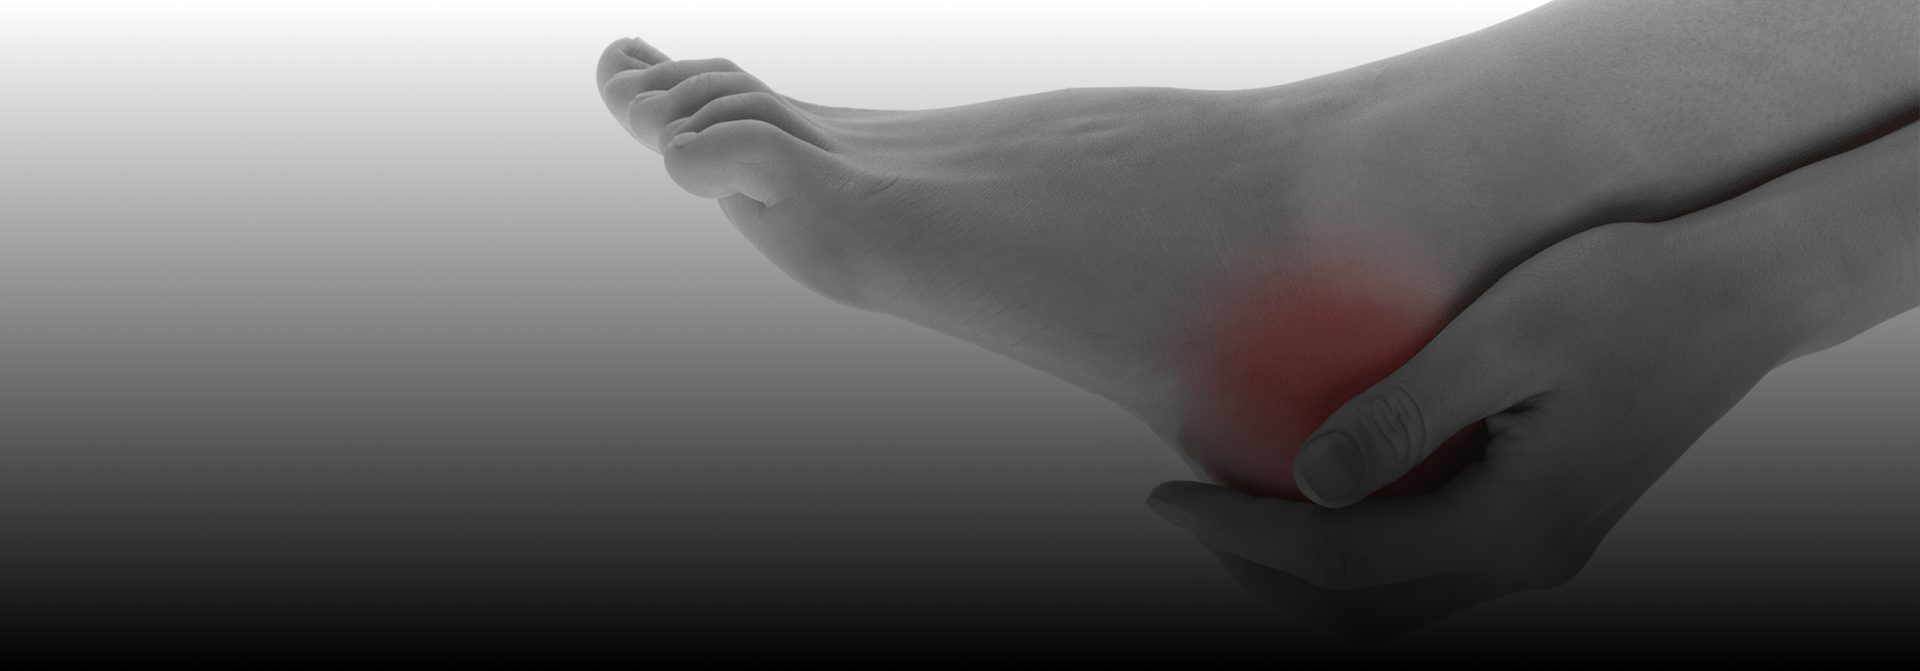 Heel Pain - Symptom Evaluation - Causes, Diagnosis, Treatment, Helth Tips,  FAQs